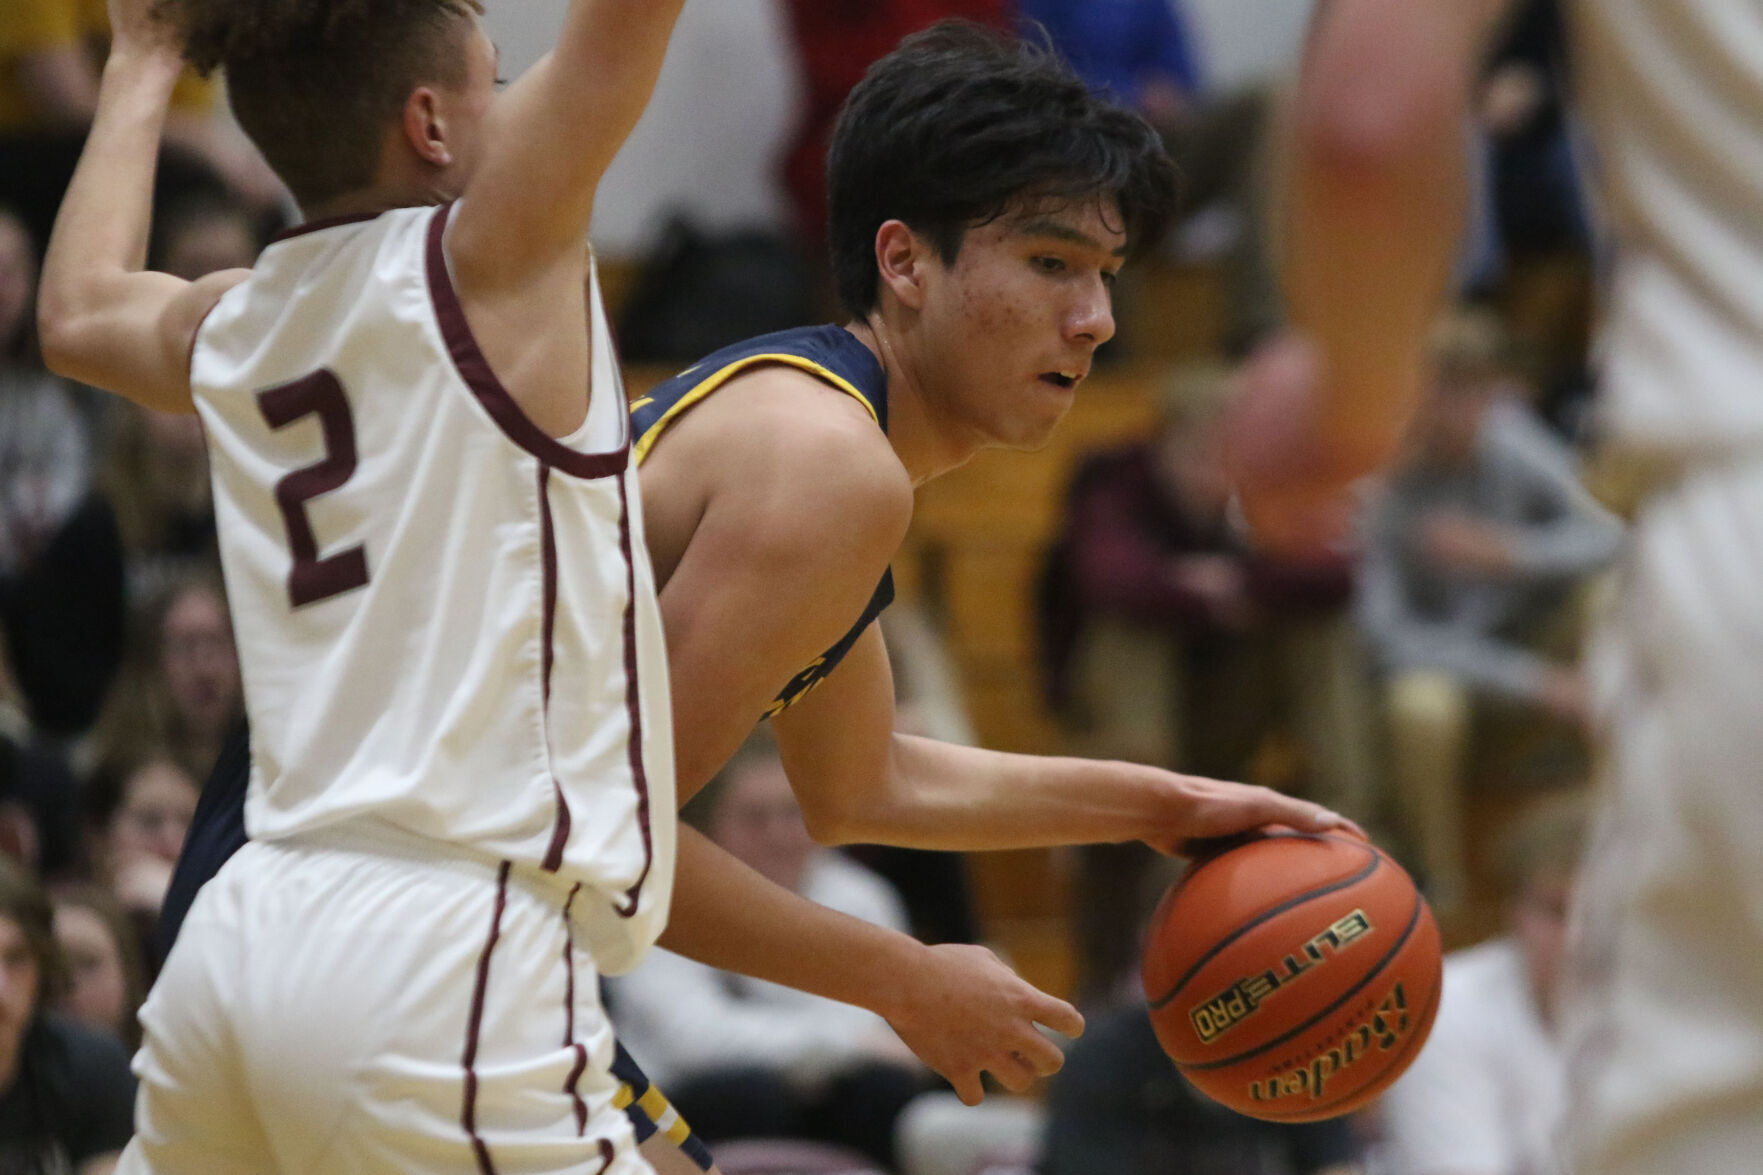 Benson Kieffer Leads Rapid City Christian to Victory Over Spearfish With 23 Points